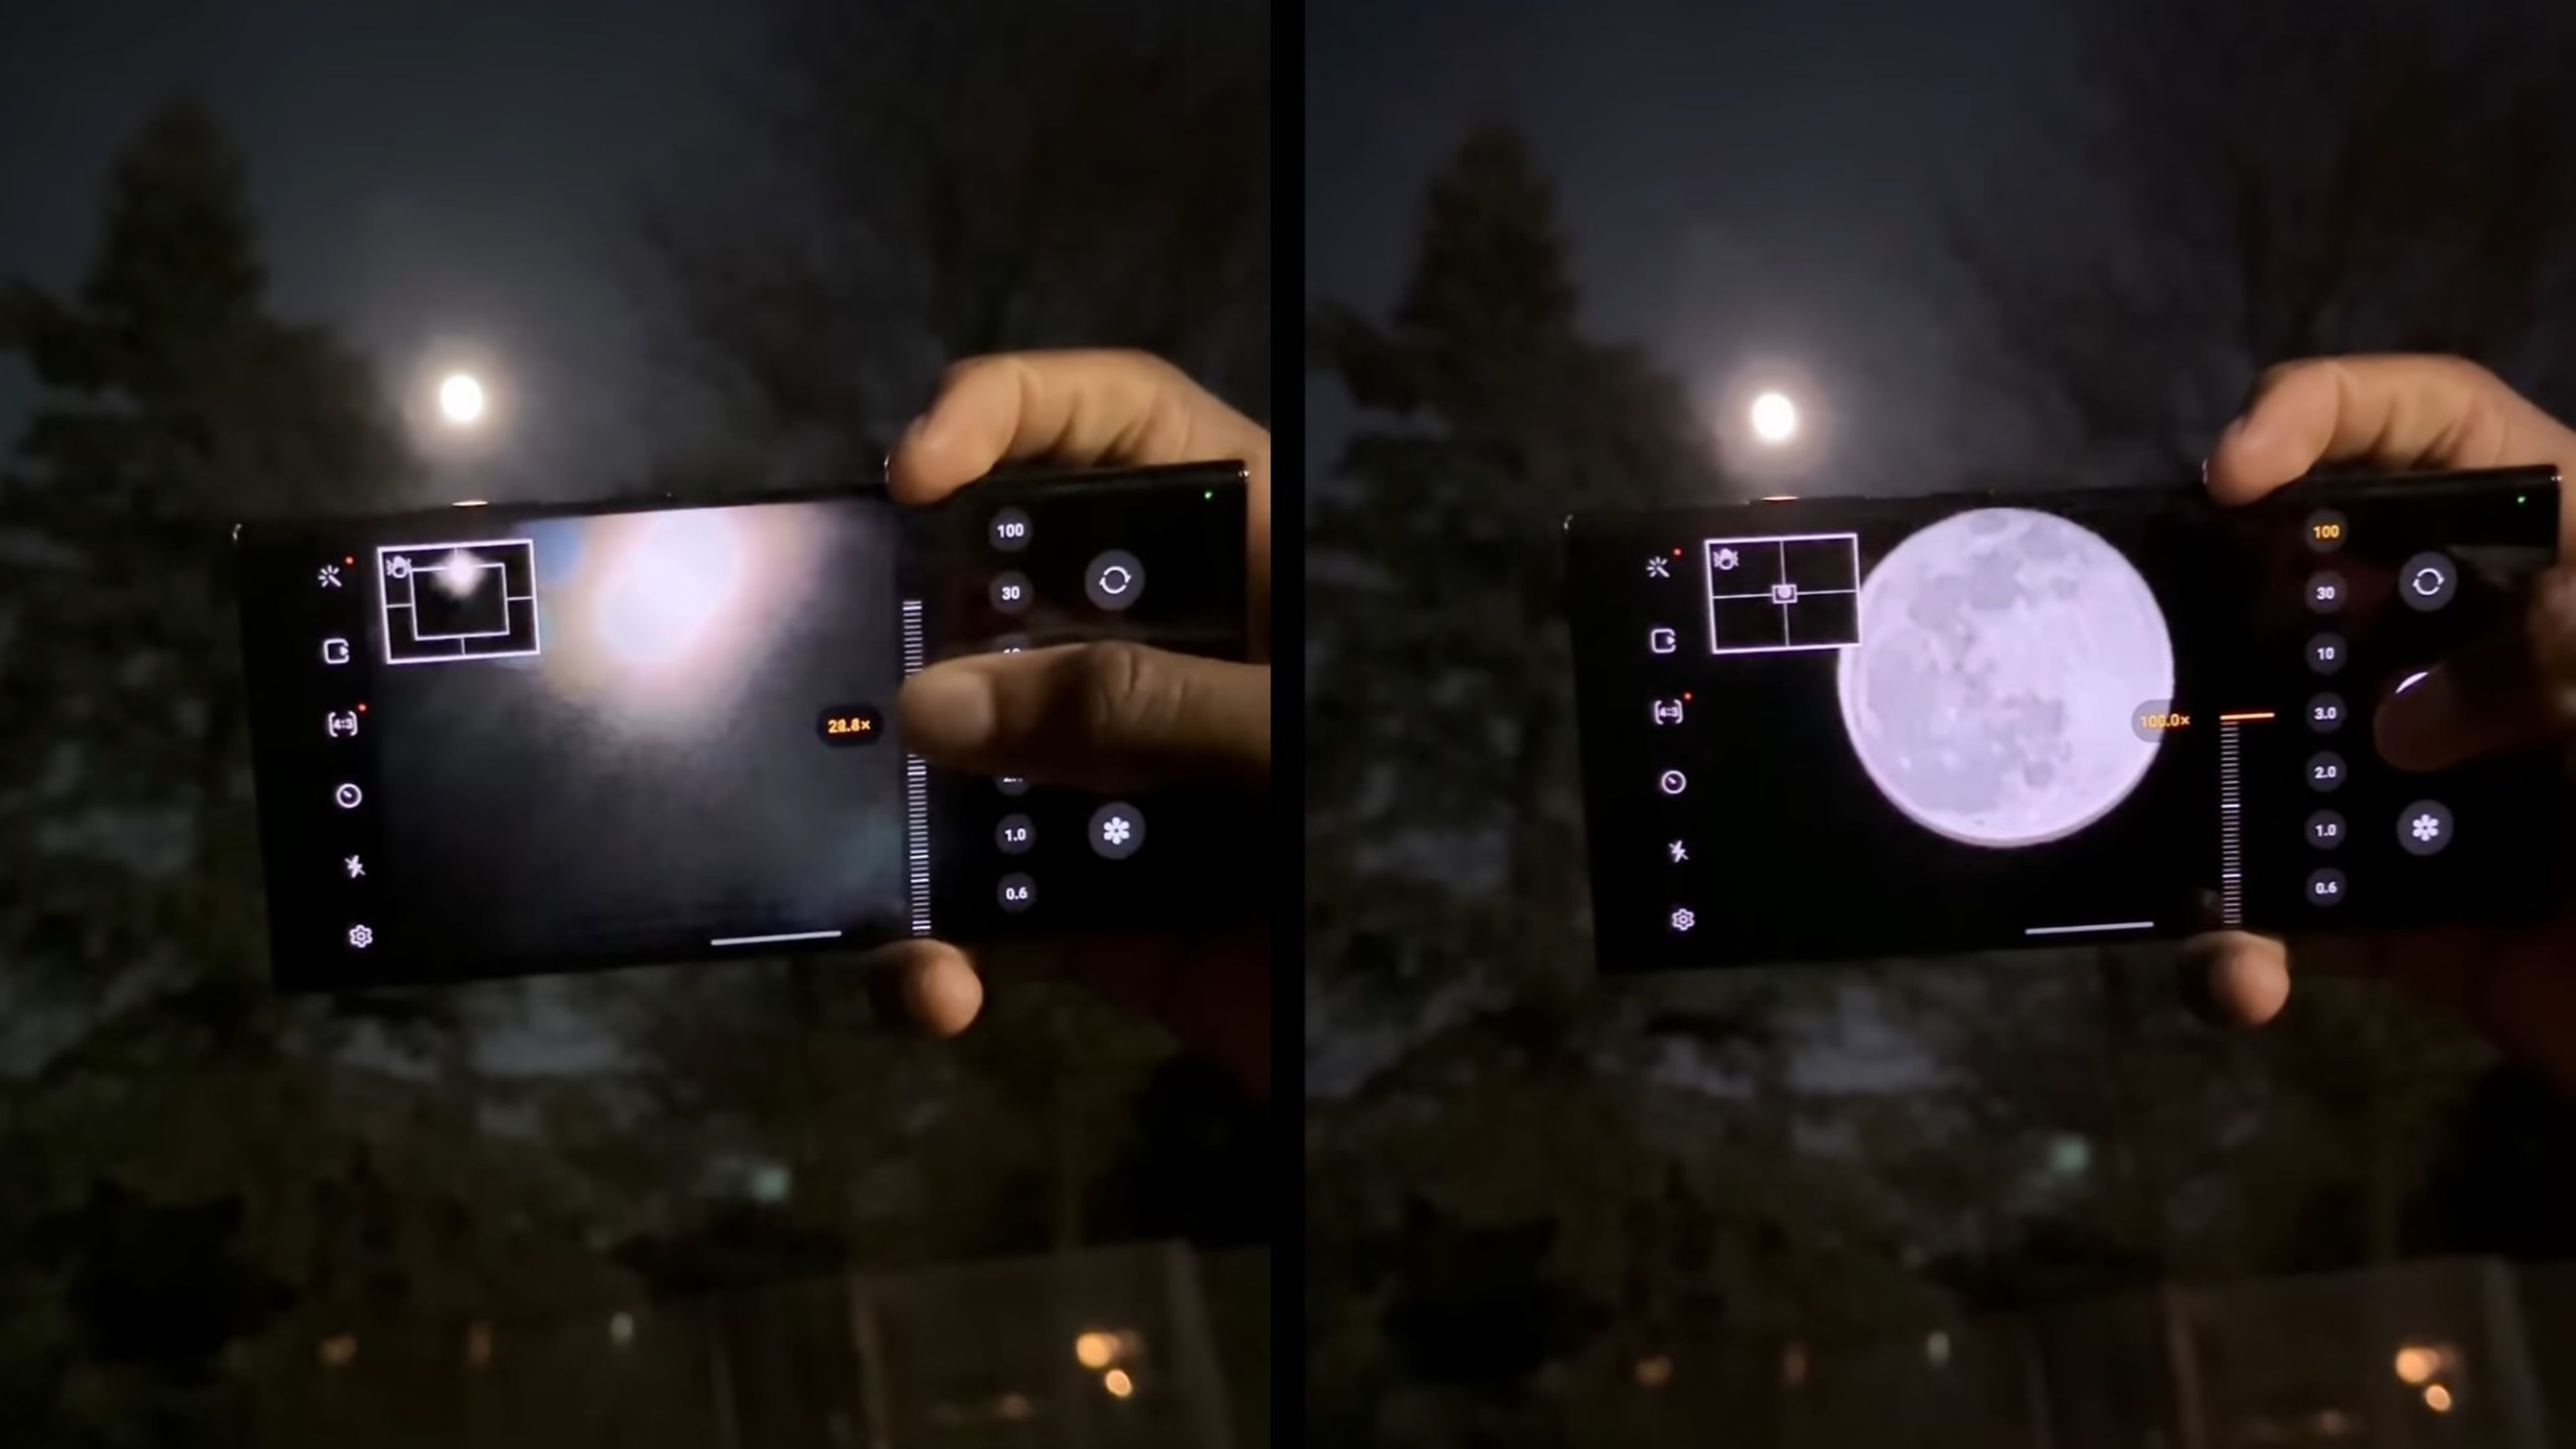 Samsung Galaxy S21 and its lunar photography